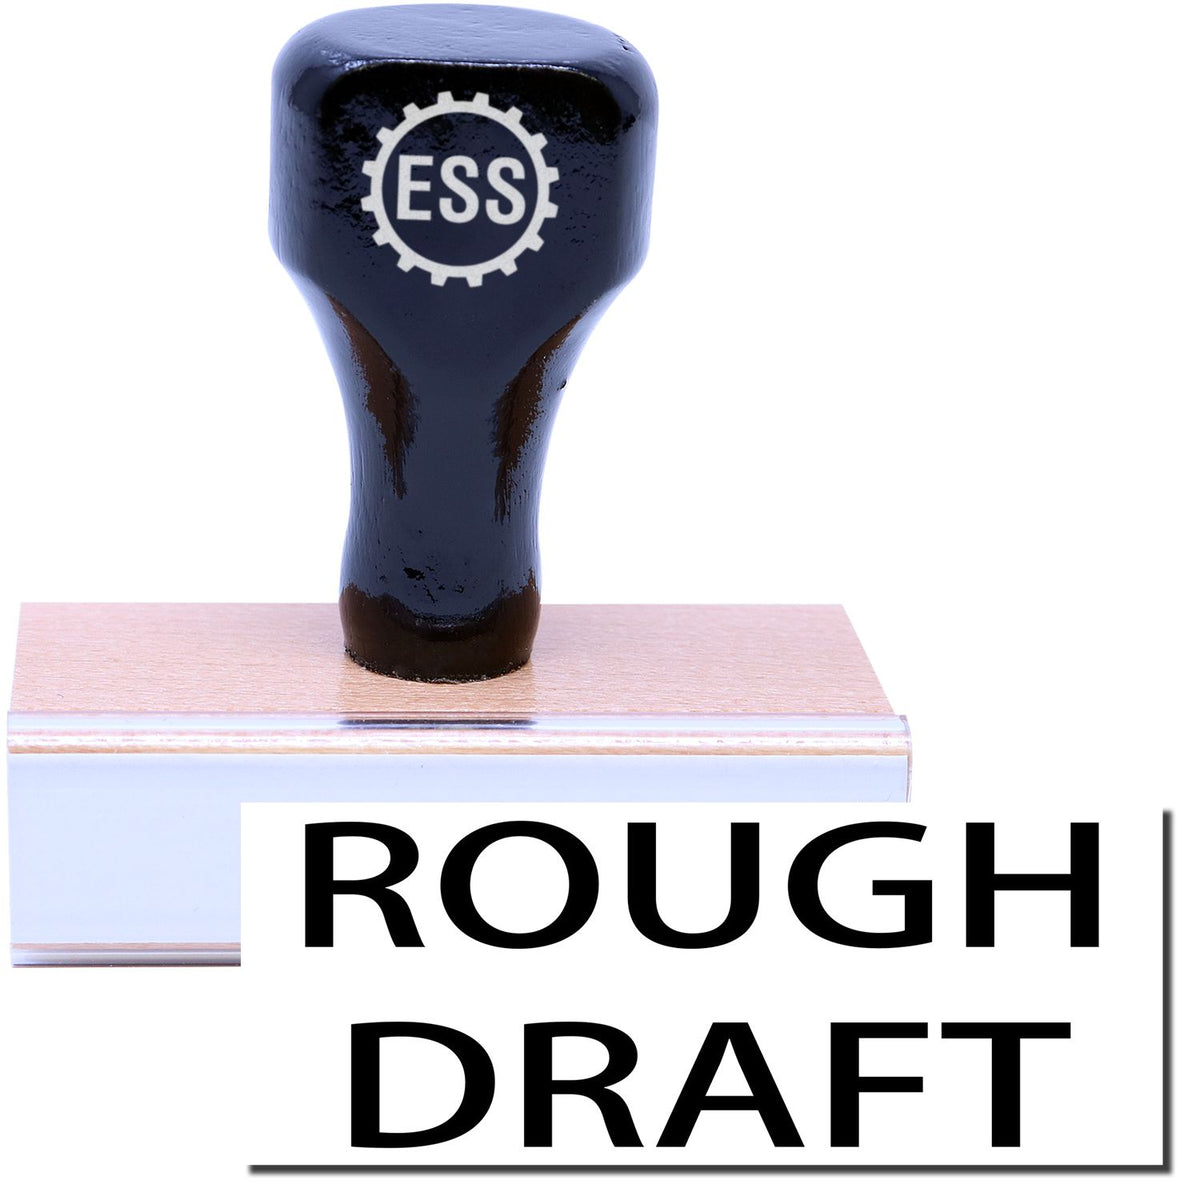 A stock office rubber stamp with a stamped image showing how the text &quot;ROUGH DRAFT&quot; in a large font is displayed after stamping.